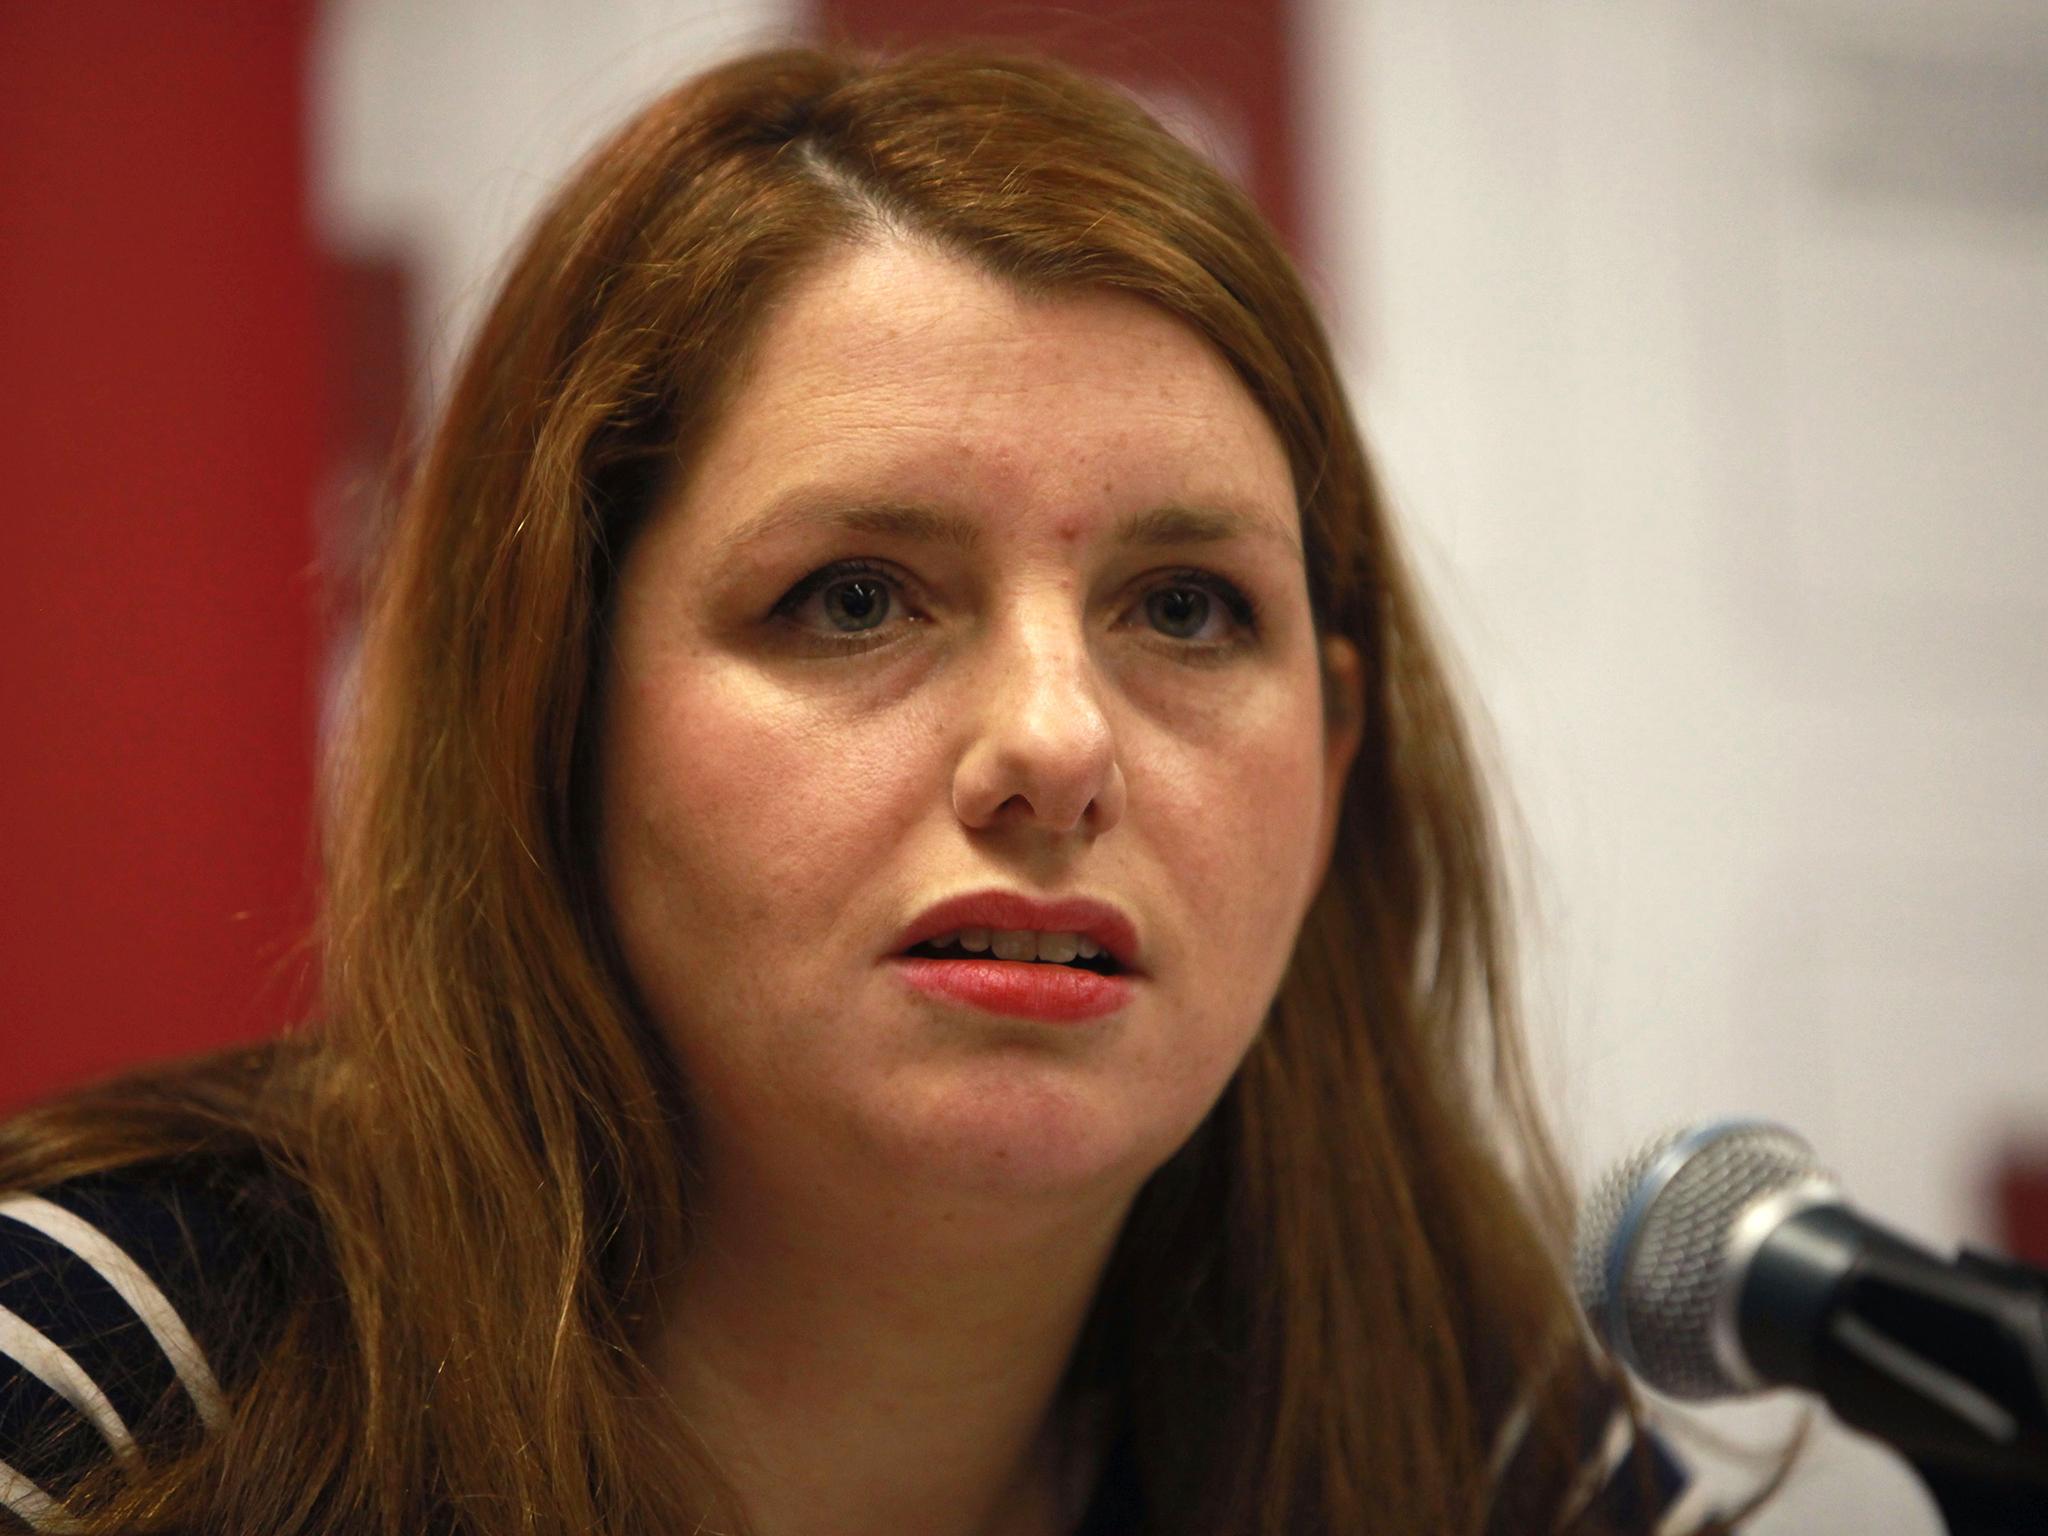 Alison McGovern fought back tears as she paid tribute to her former colleague